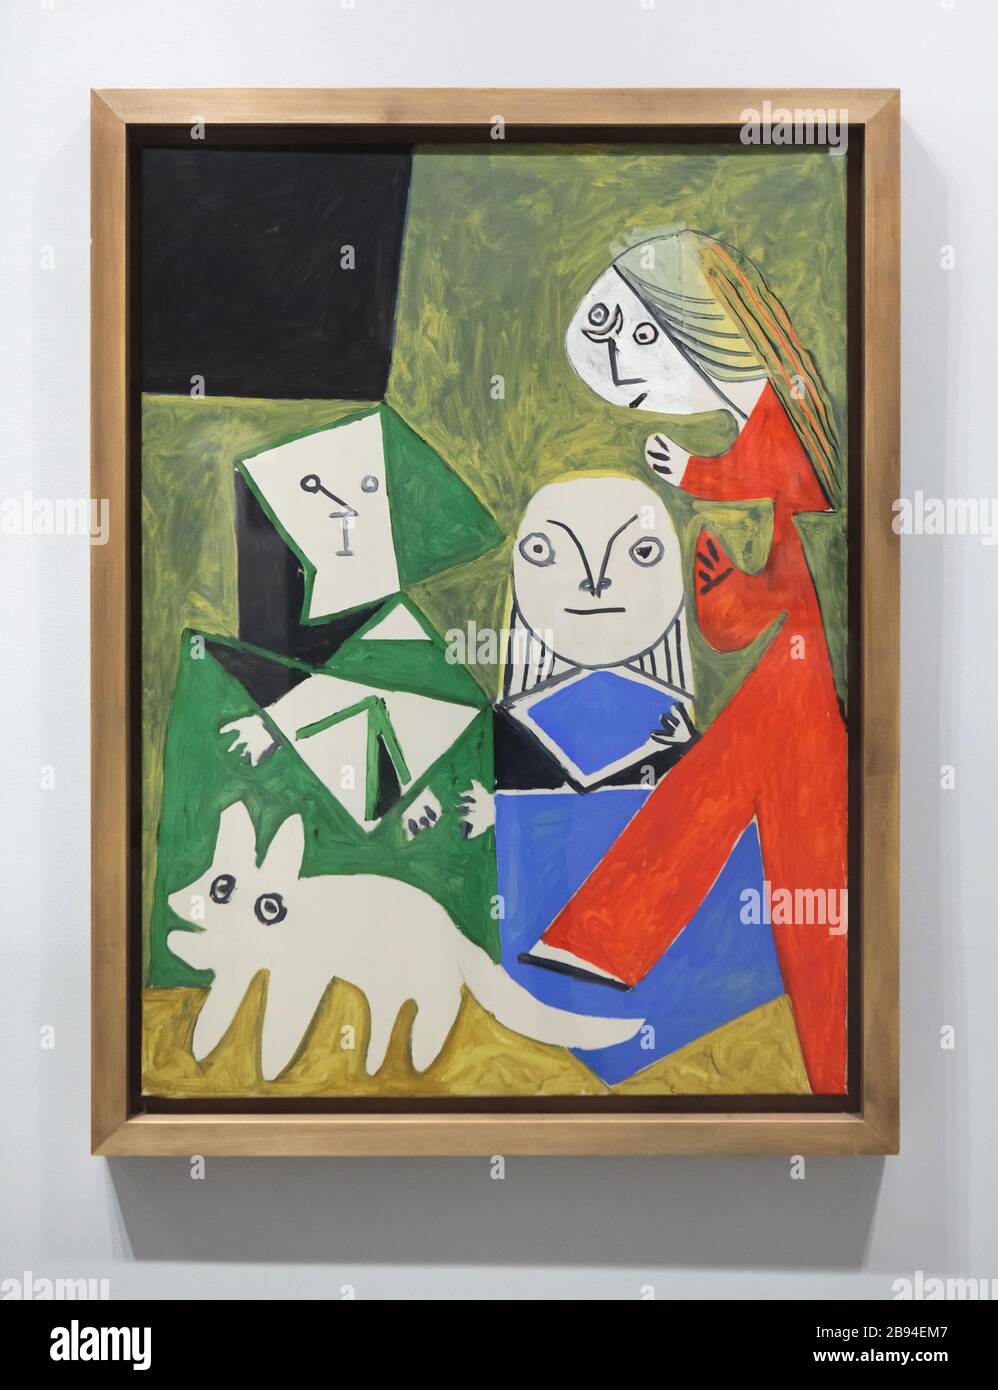 Painting 'Las Meninas' ('Isabel de Velasco, María Bárbola and Nicolasito  Perusato') by Pablo Picasso after Spanish painter Diego Velázquez painted  in Cannes (France) on 24 September 1957 on display in the Museu